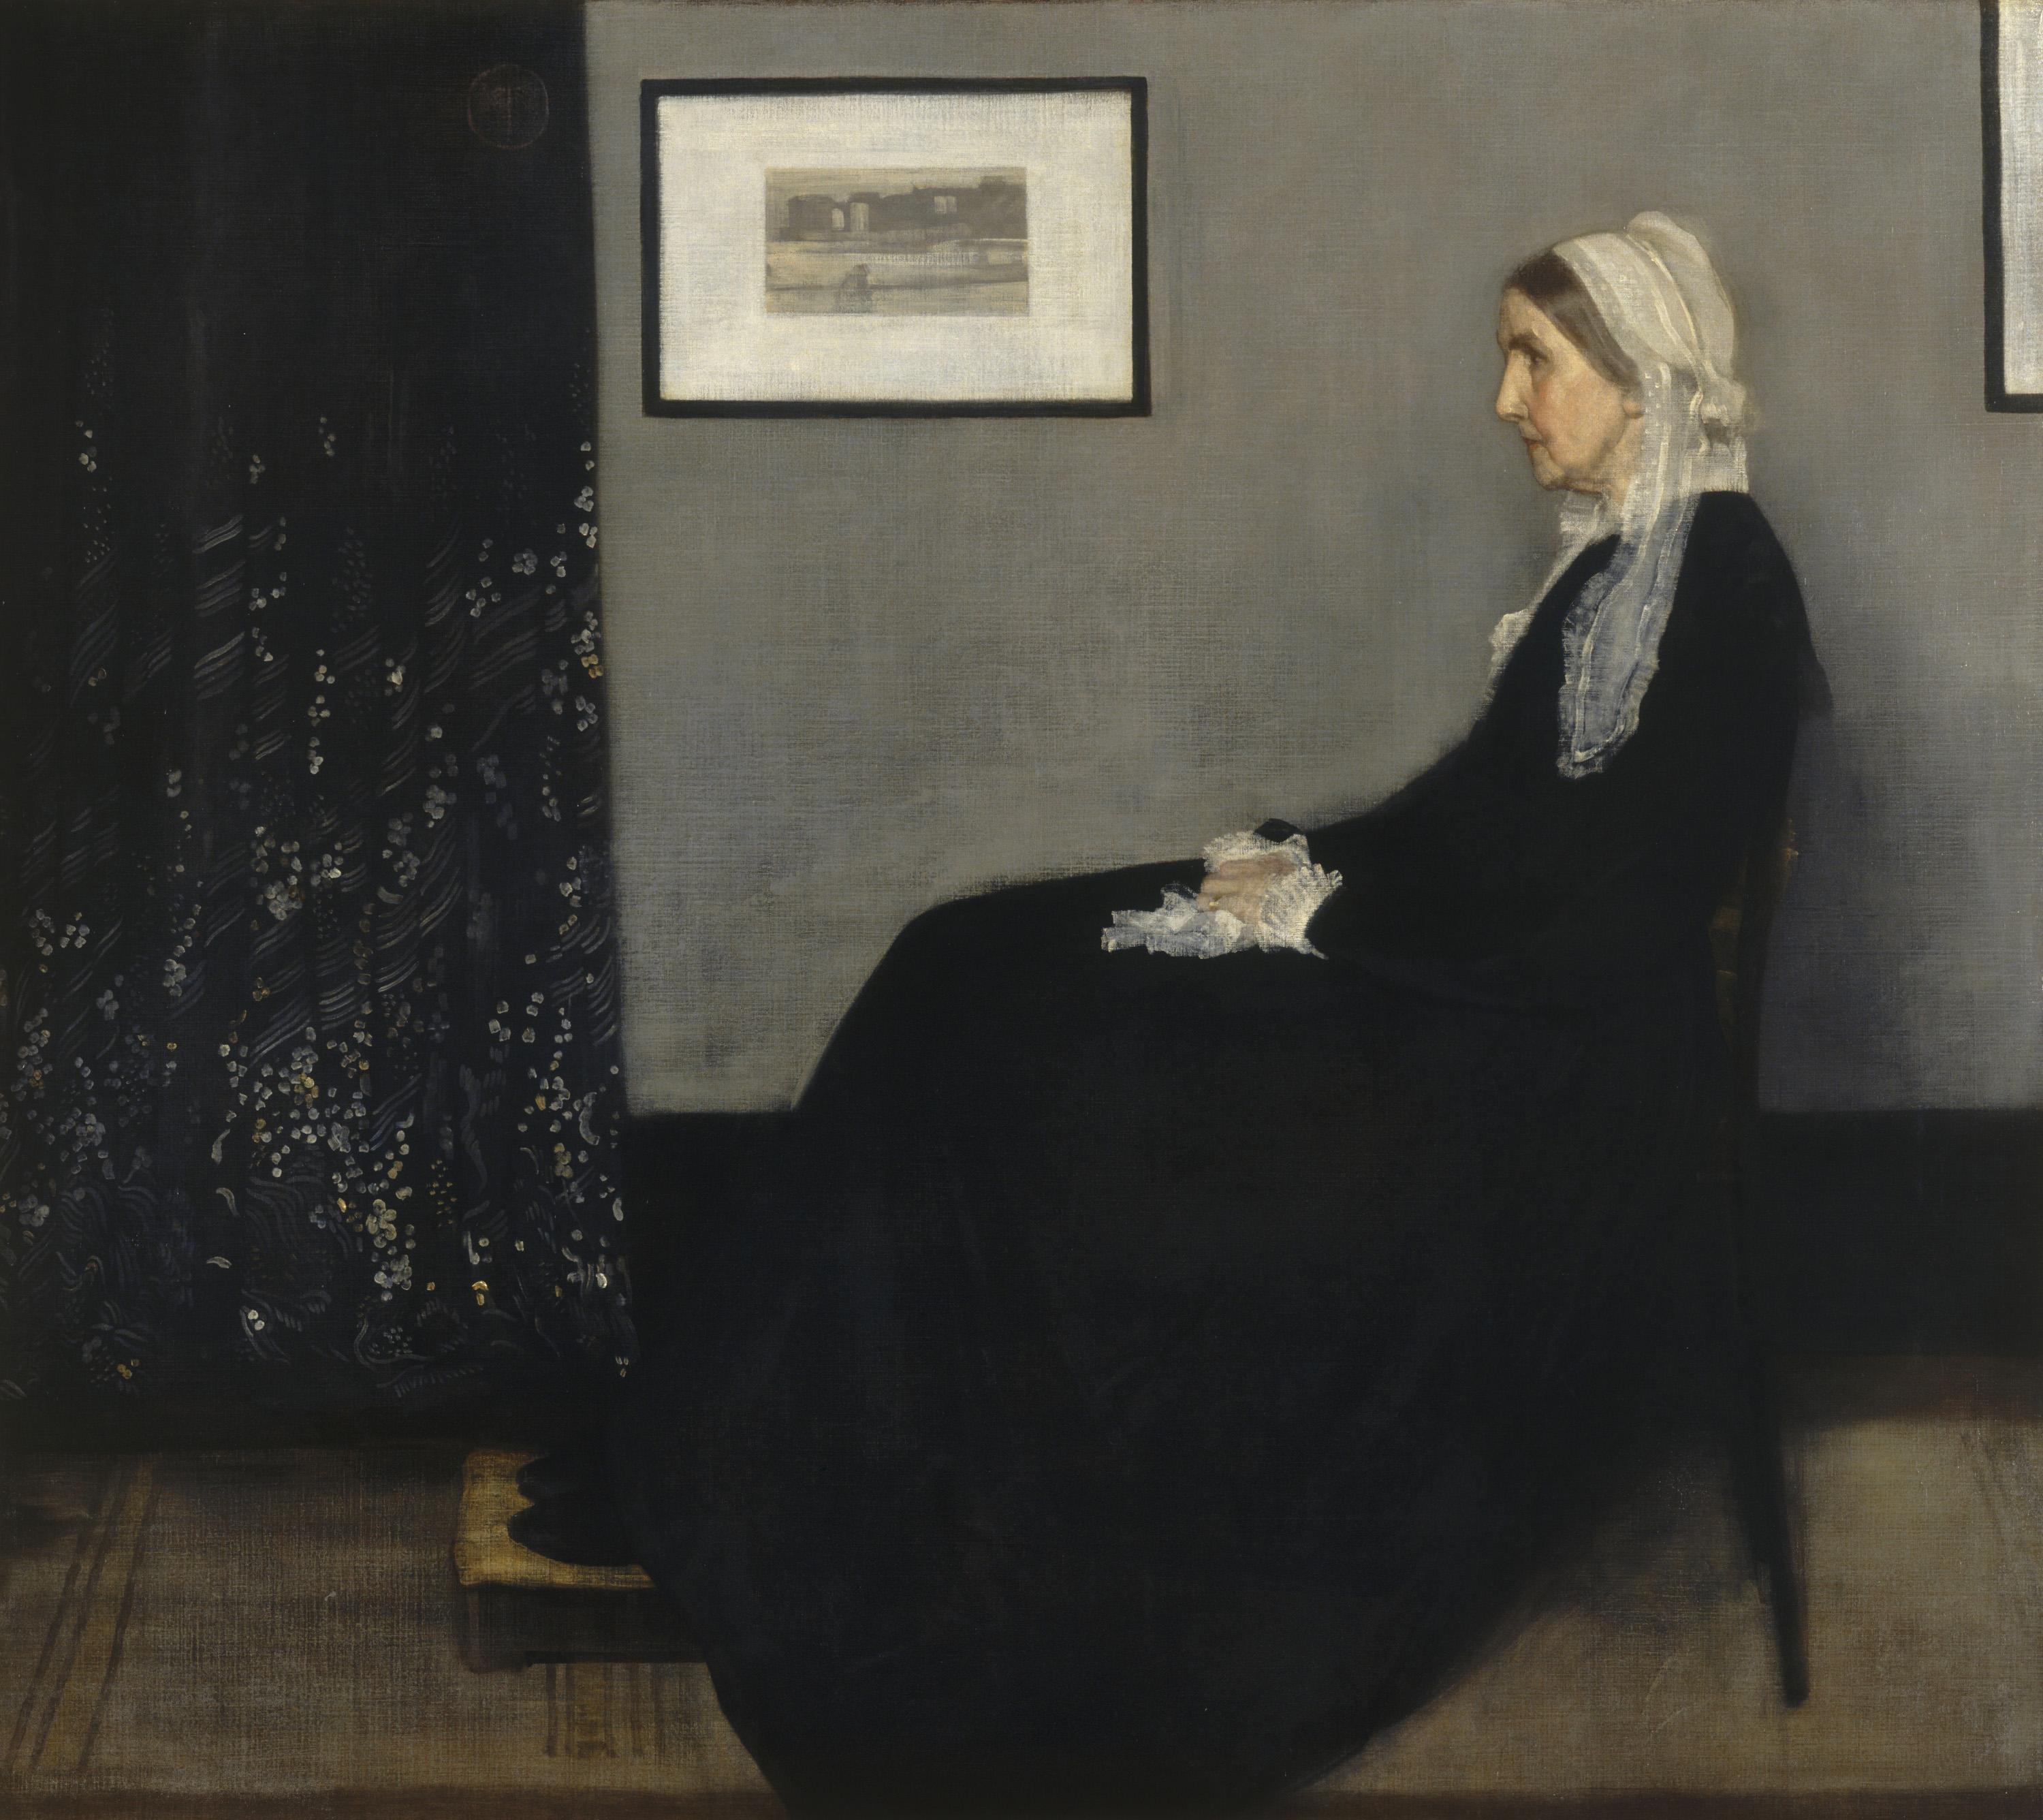 James McNeill Whistler. “Arrangement in Grey and Black No. 1 (Portrait of the Artist's Mother),” 1871. Musée d'Orsay, Paris, RF 699. © RMN-Grand Palais / Art Resource, NY.